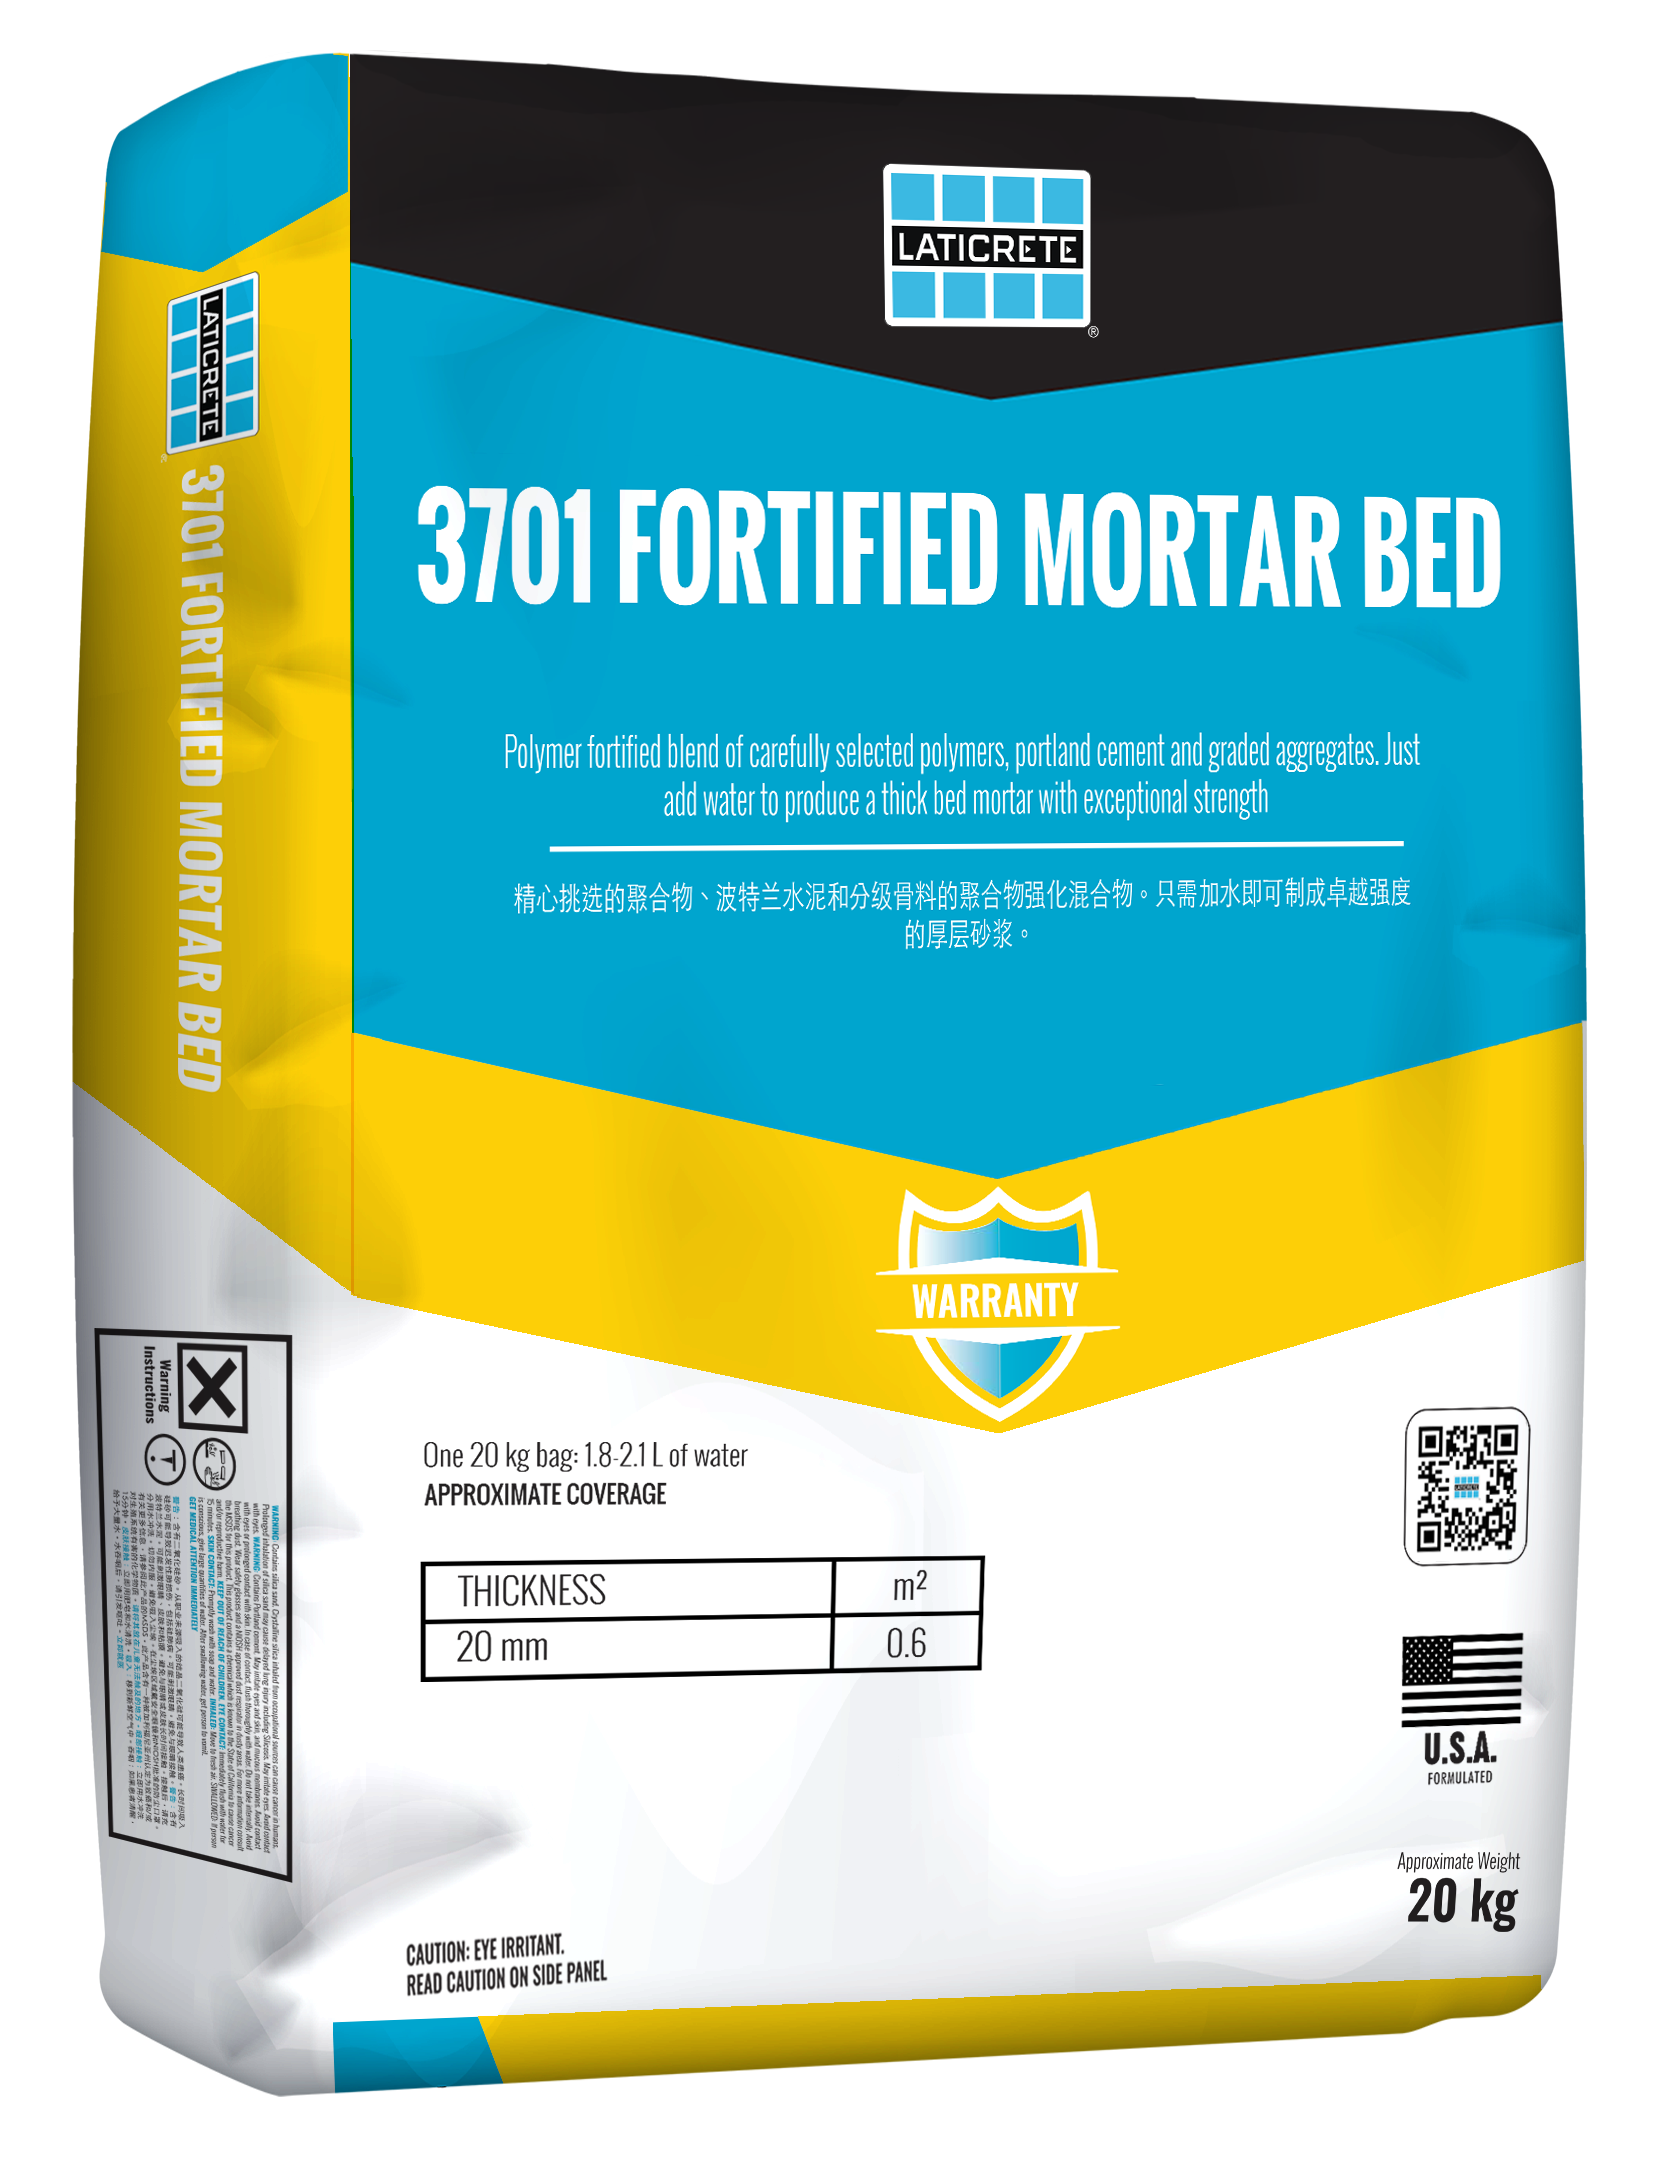 3701 Fortified Mortar Bed